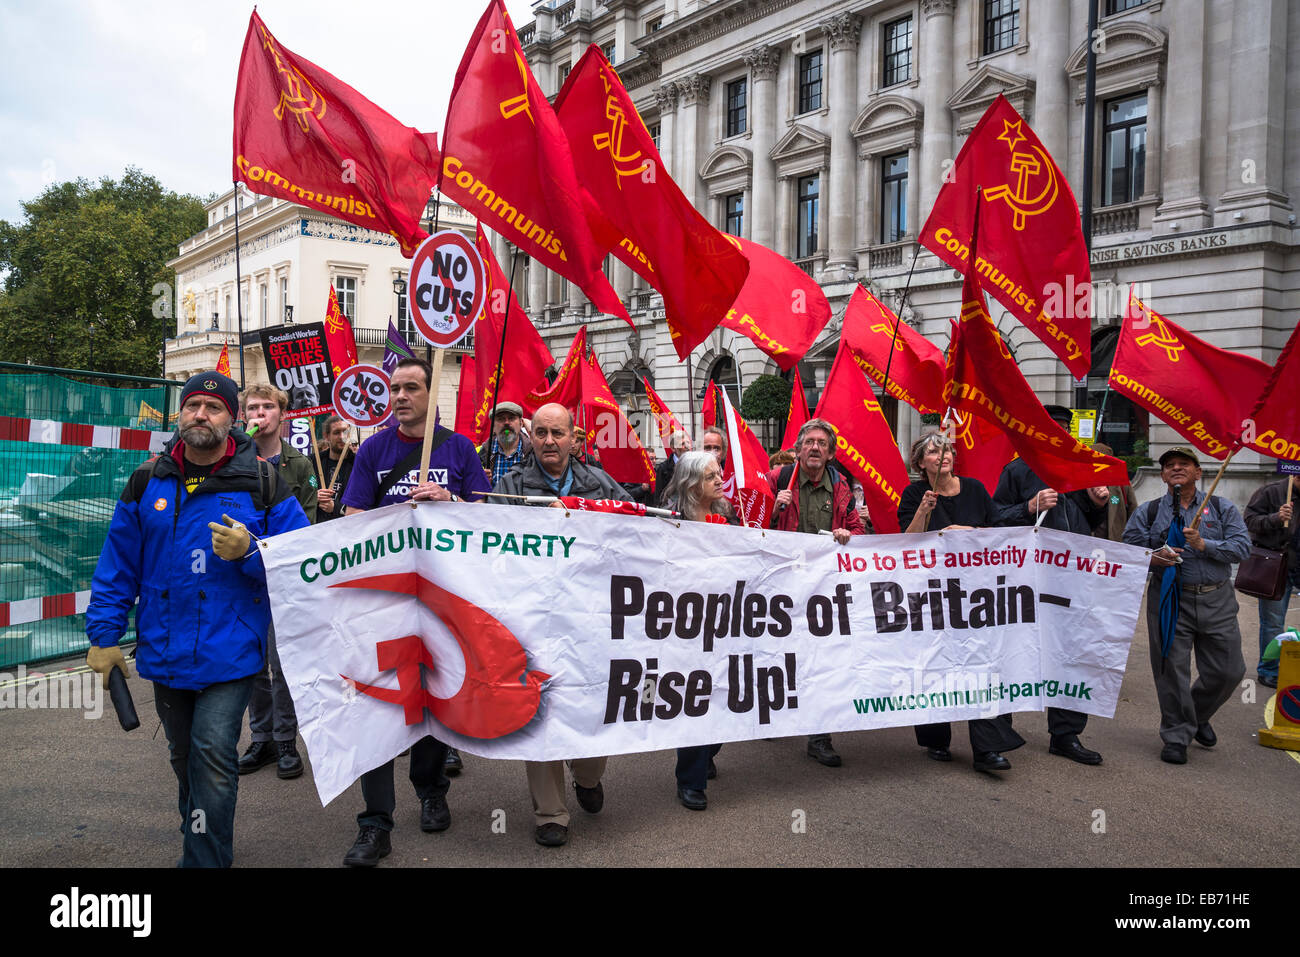 Britain Needs a Pay Rise march, Communist Party, London, 18 October 2014, UK Stock Photo